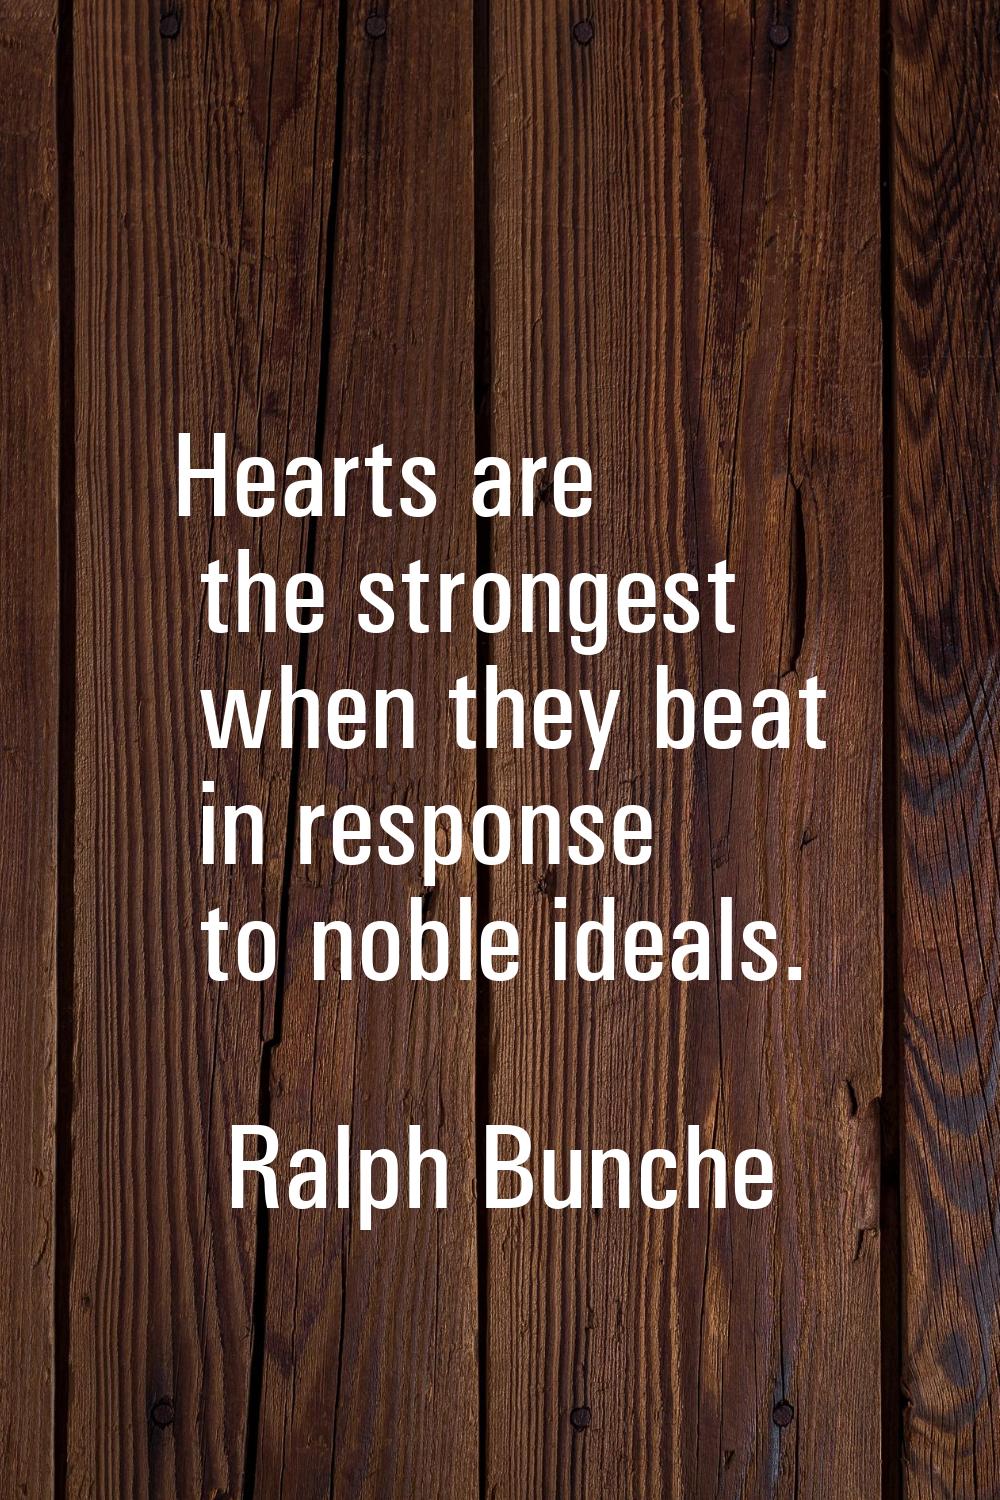 Hearts are the strongest when they beat in response to noble ideals.